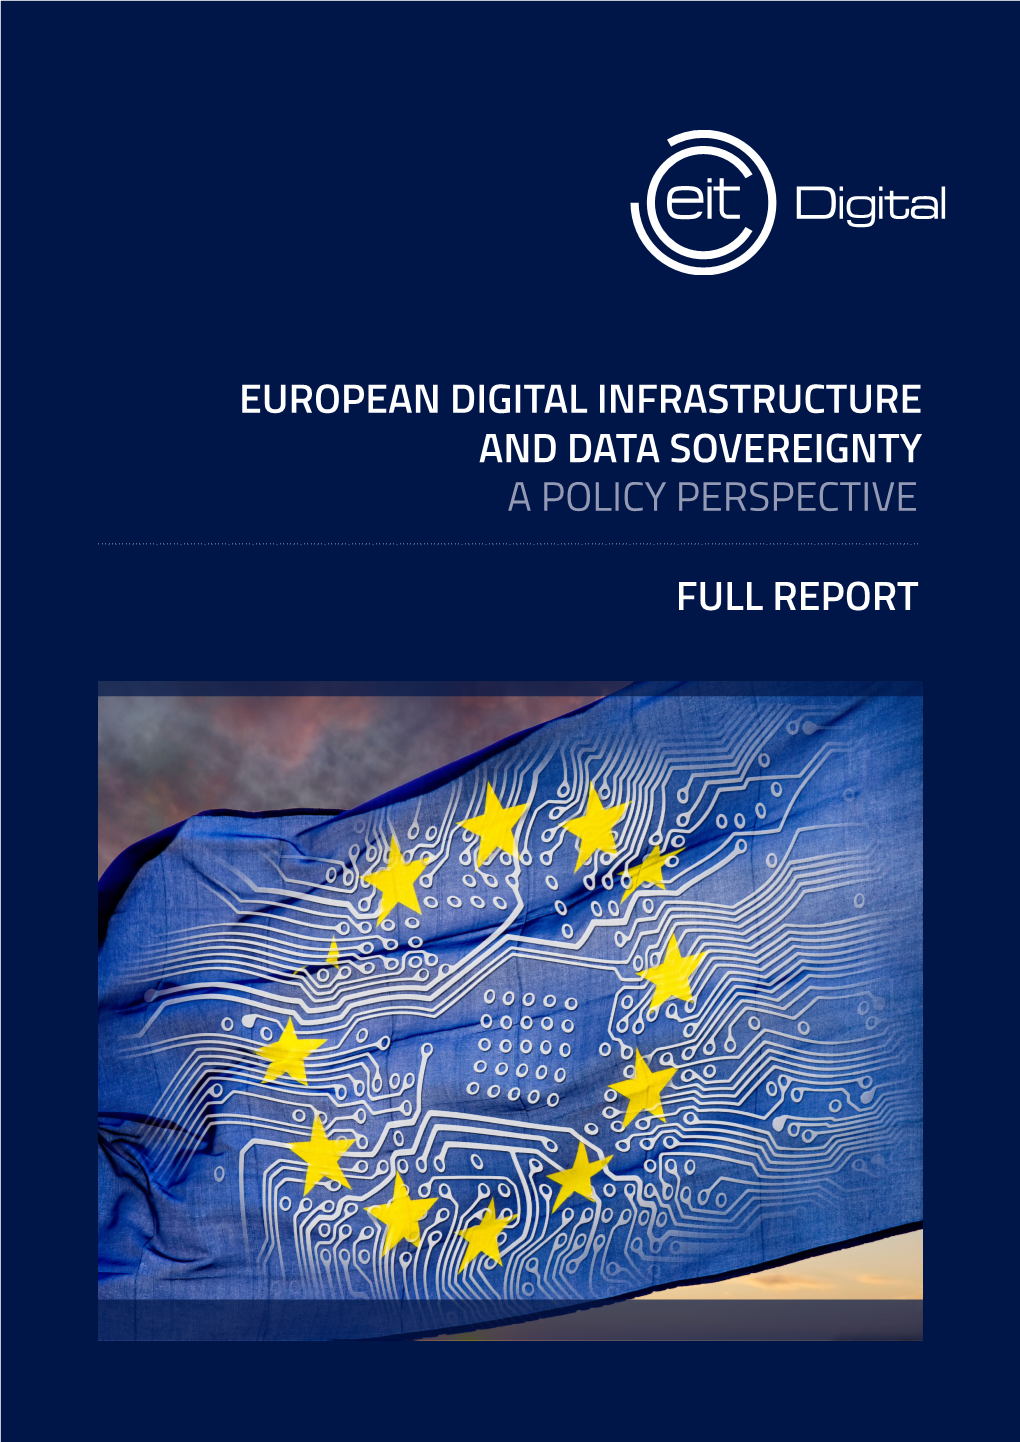 European Digital Infrastructure and Data Sovereignty a Policy Perspective